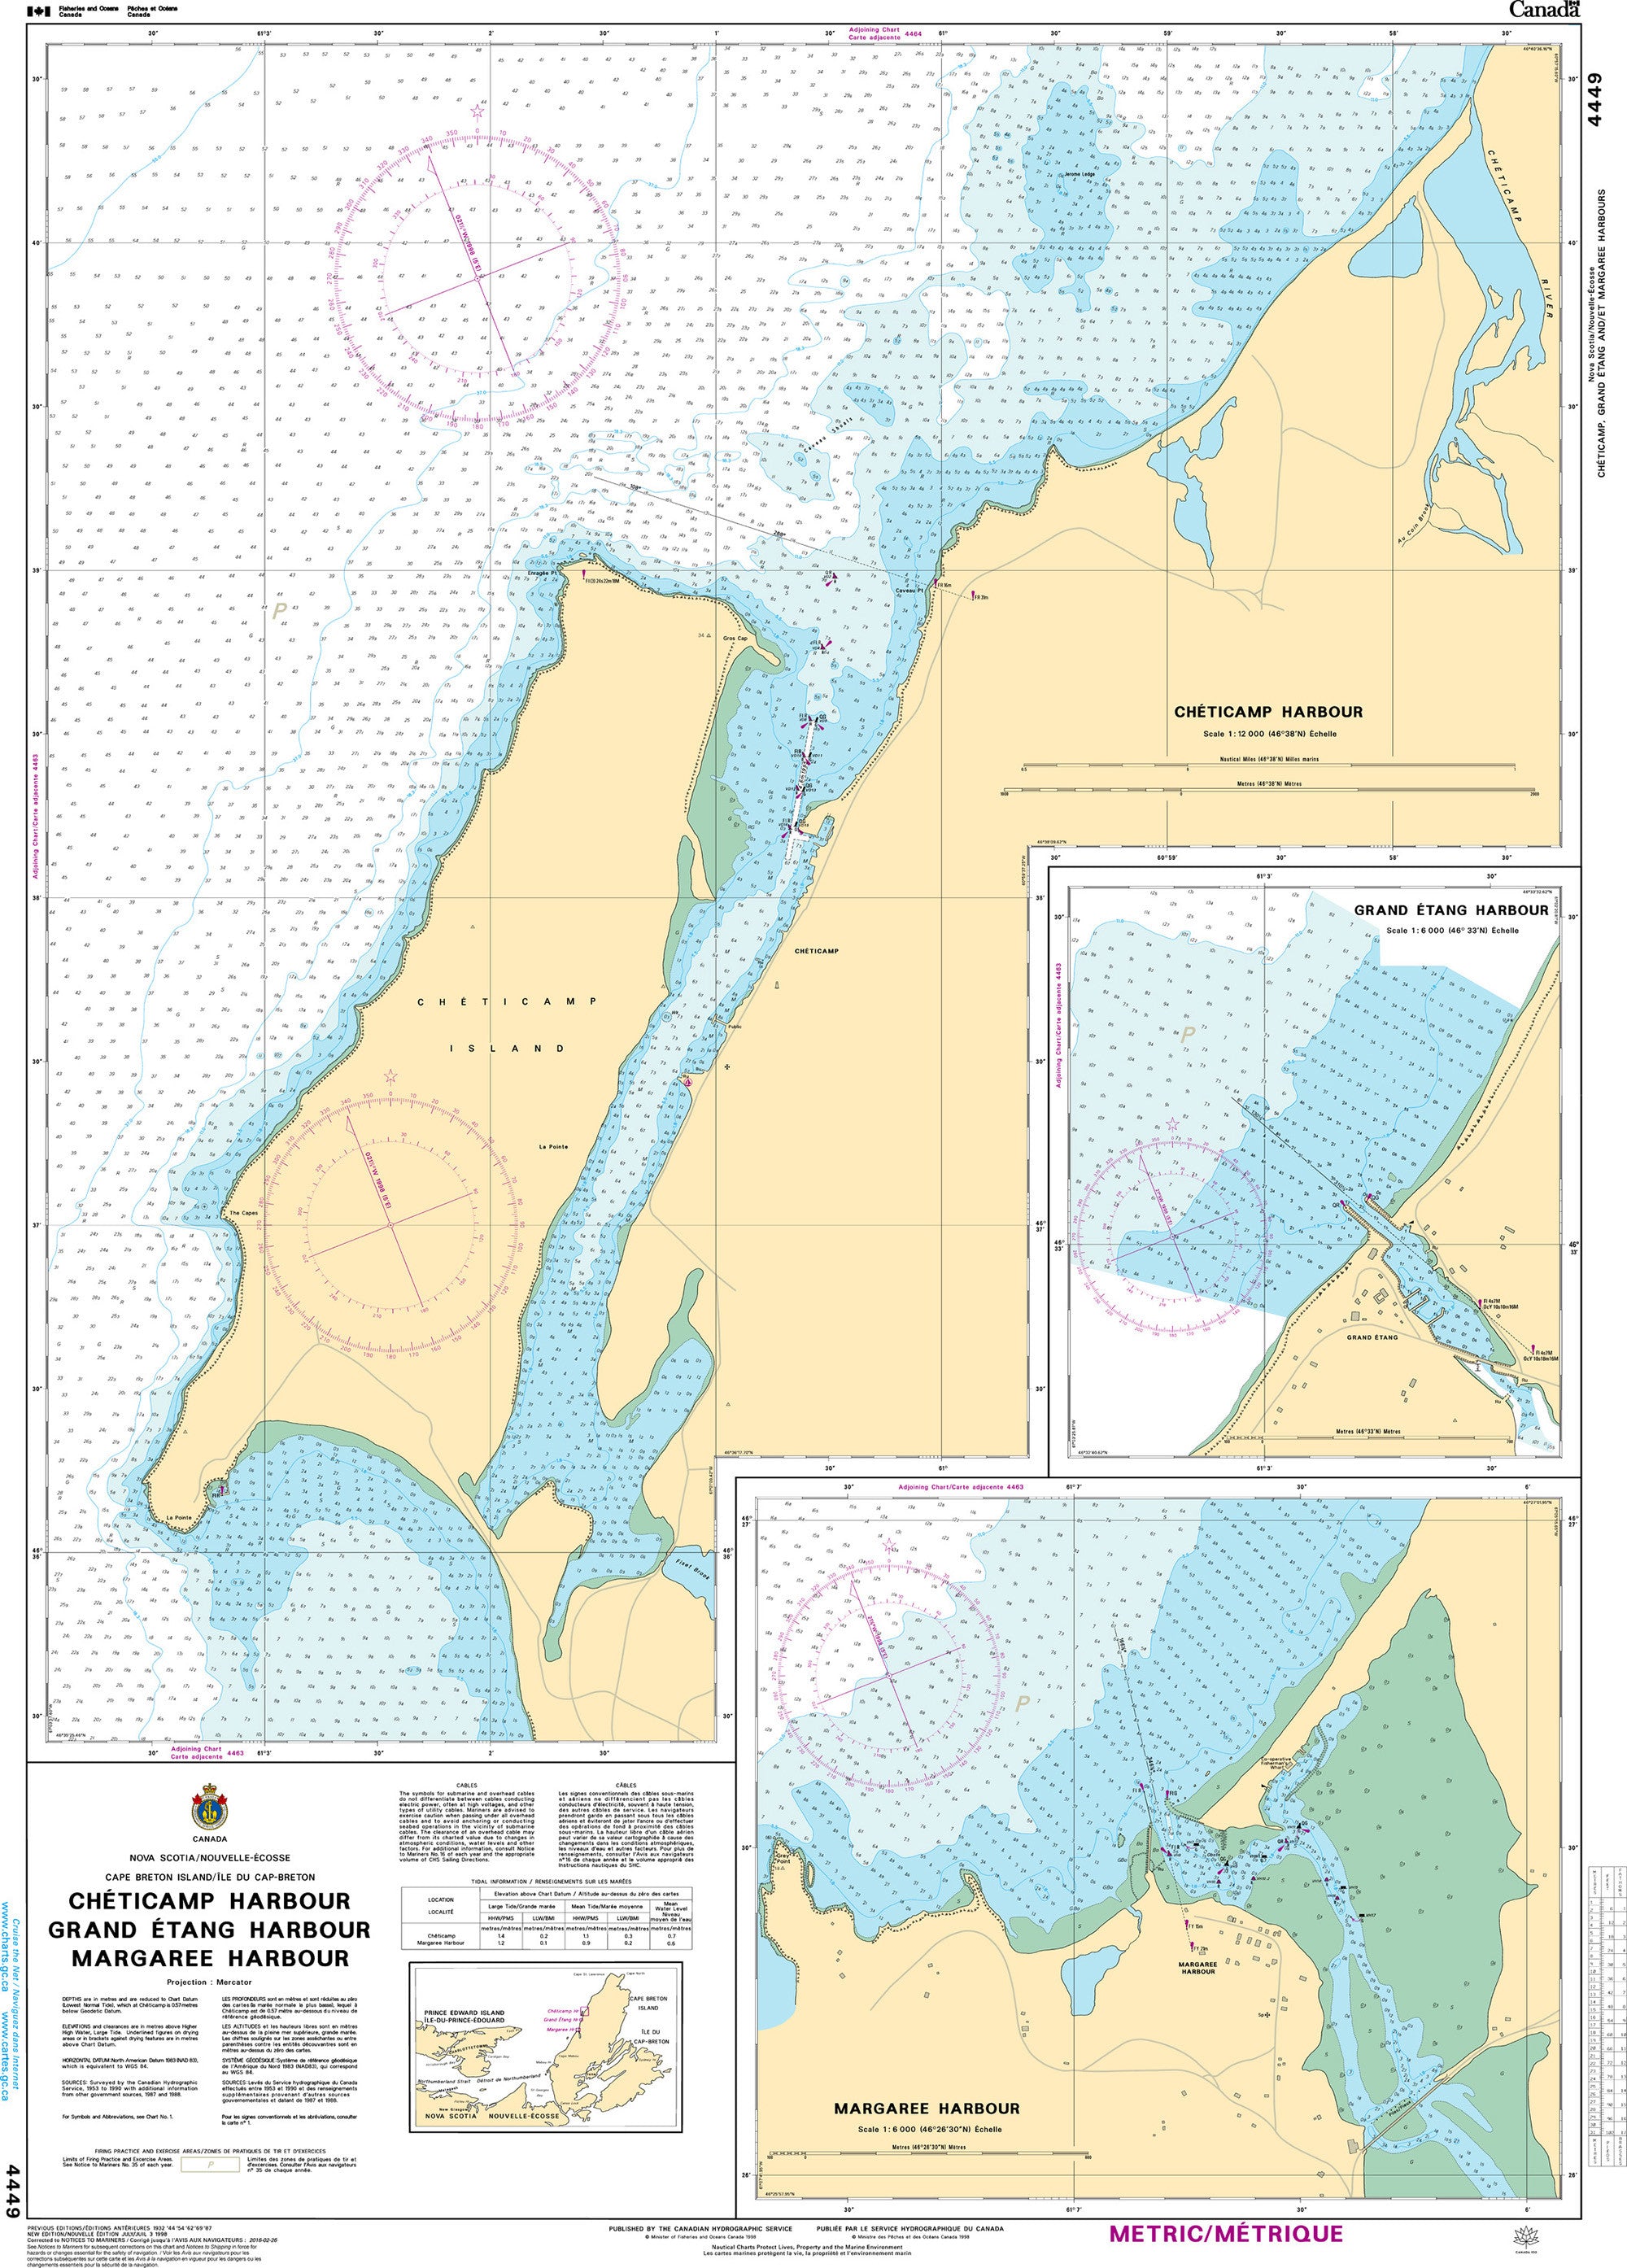 Canadian Hydrographic Service Nautical Chart CHS4449: Chéticamp, Grand Étang and Margaree Harbours